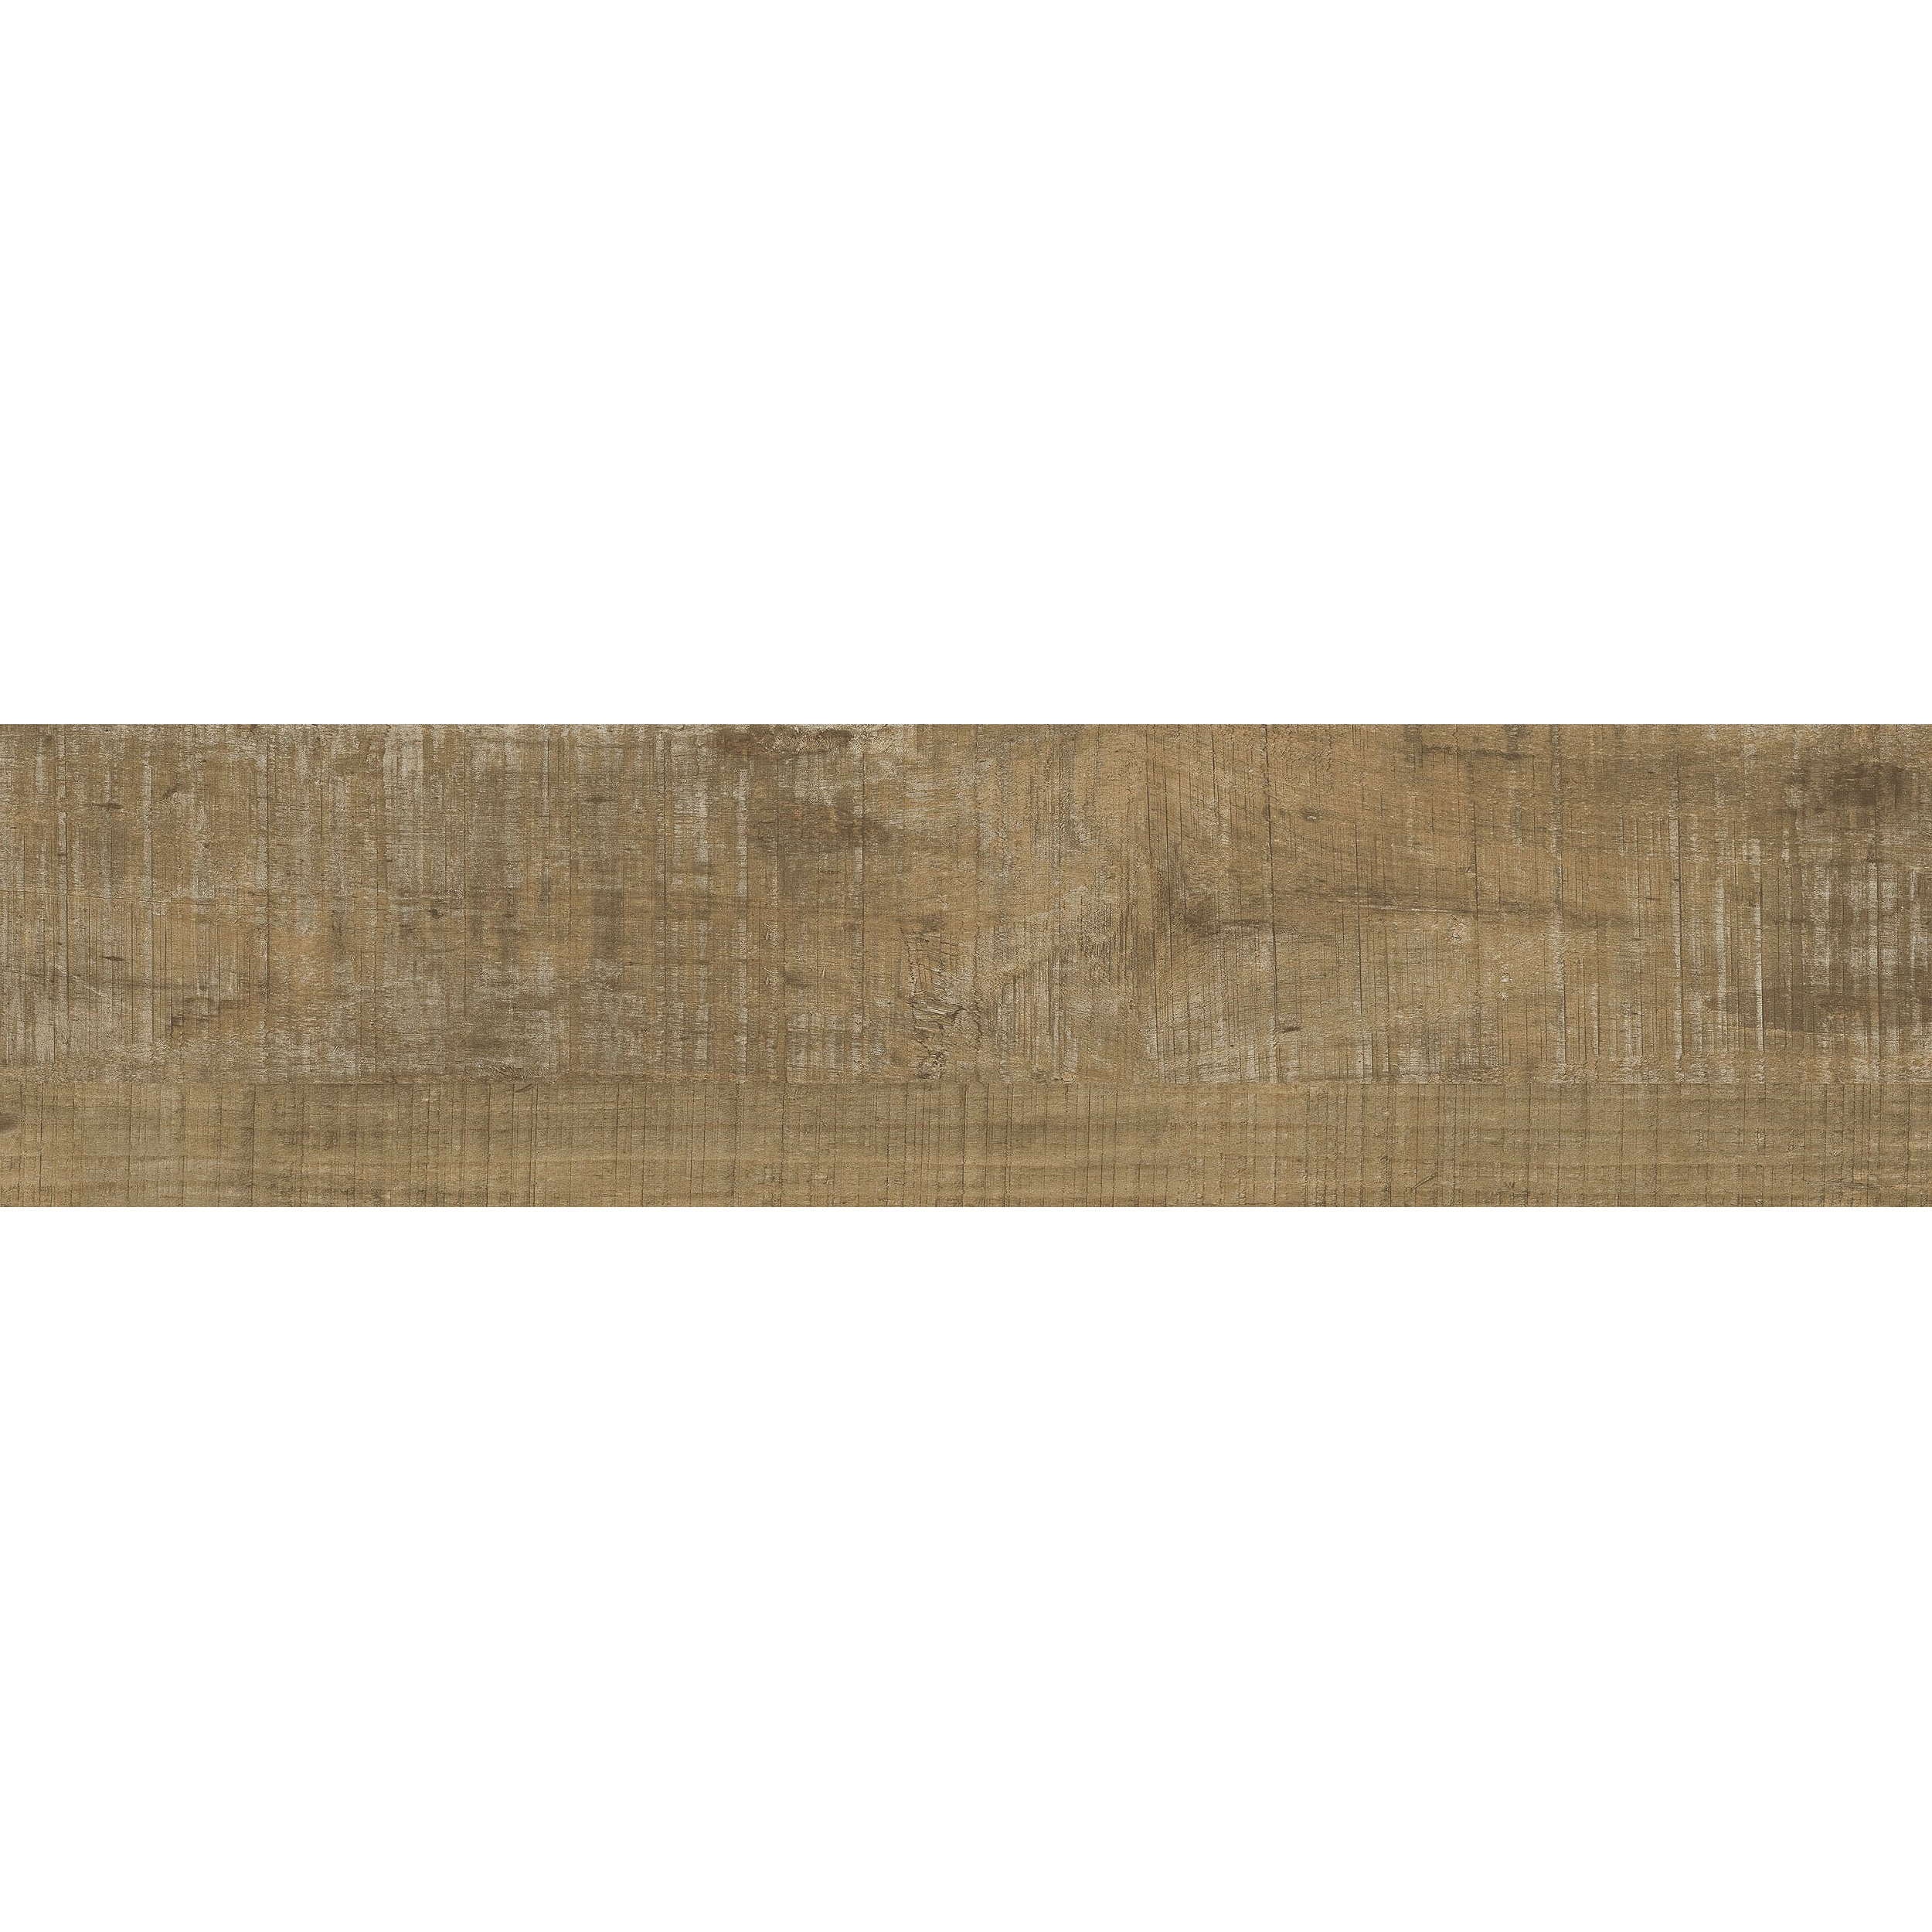 Textured Woodgrains LVT In Distressed Hickory image number 10